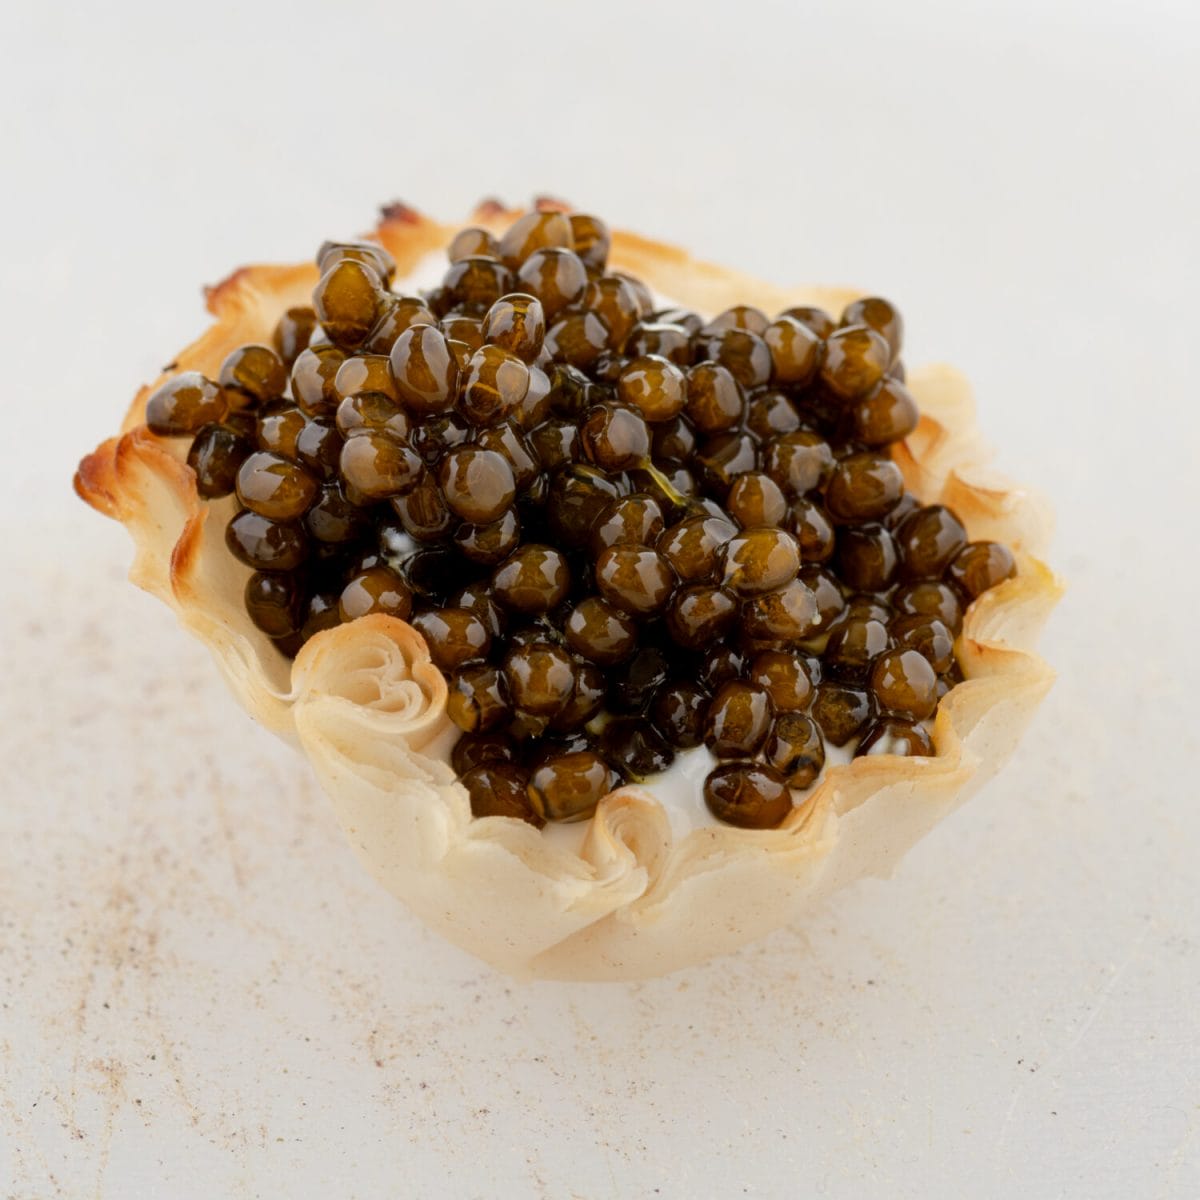 Toronto Lifestyle Food Photographer for Horderve and Caviar using AI & CGI Before